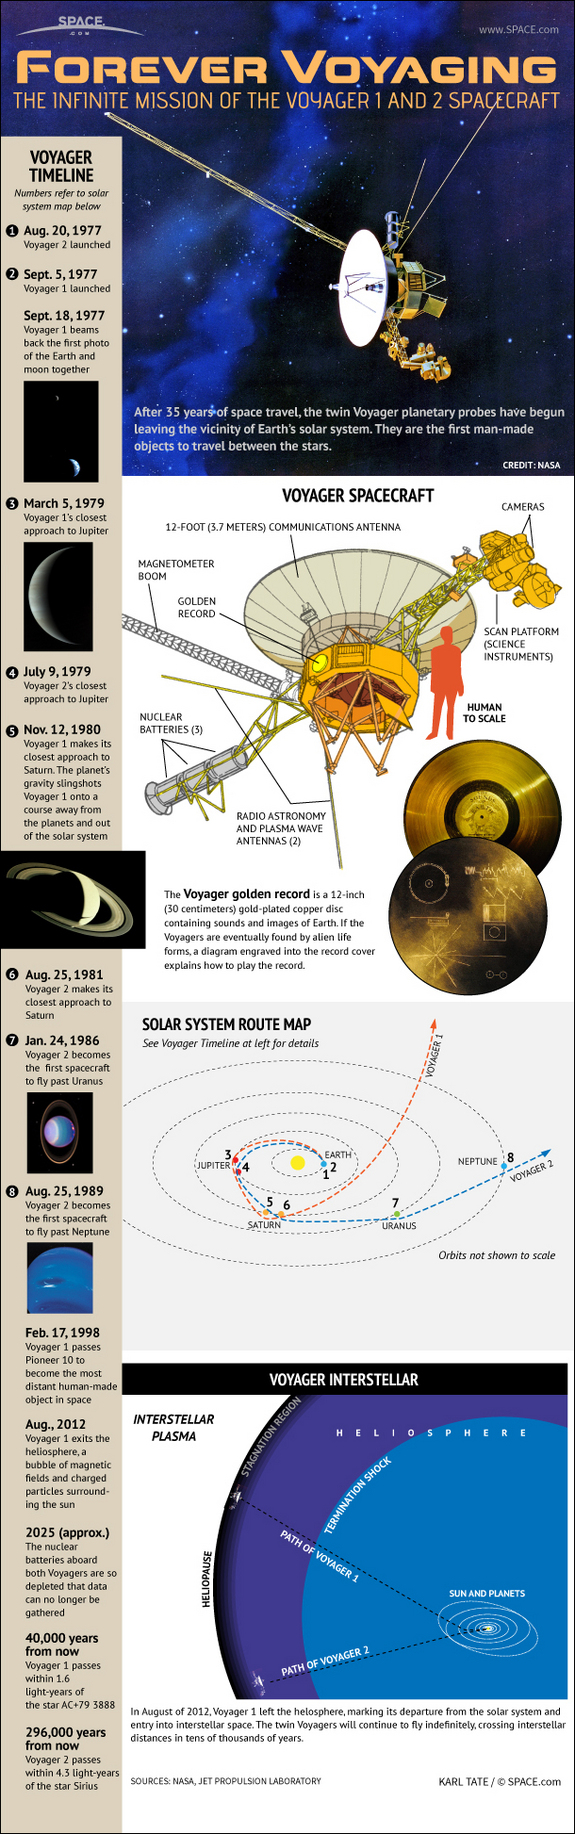 The Voyager space probes